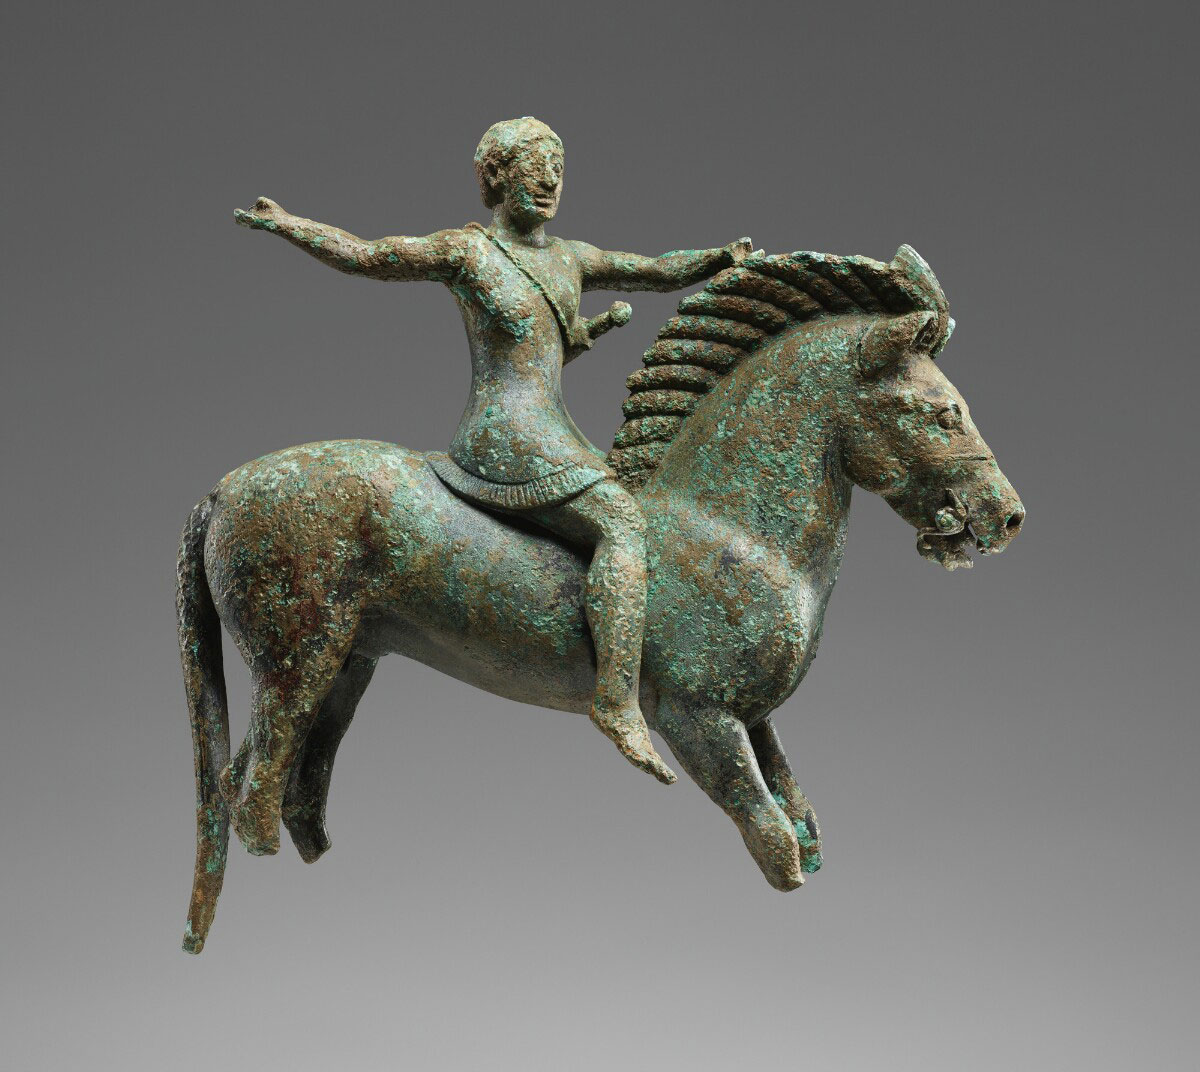 Statuette of a Horse and Rider, 520–500 BC, Greek. Bronze, 5 9/16 × 5 7/16 × 2 3/16 in. Albanian Institute of Archaeology, Tirana VL.2020.1